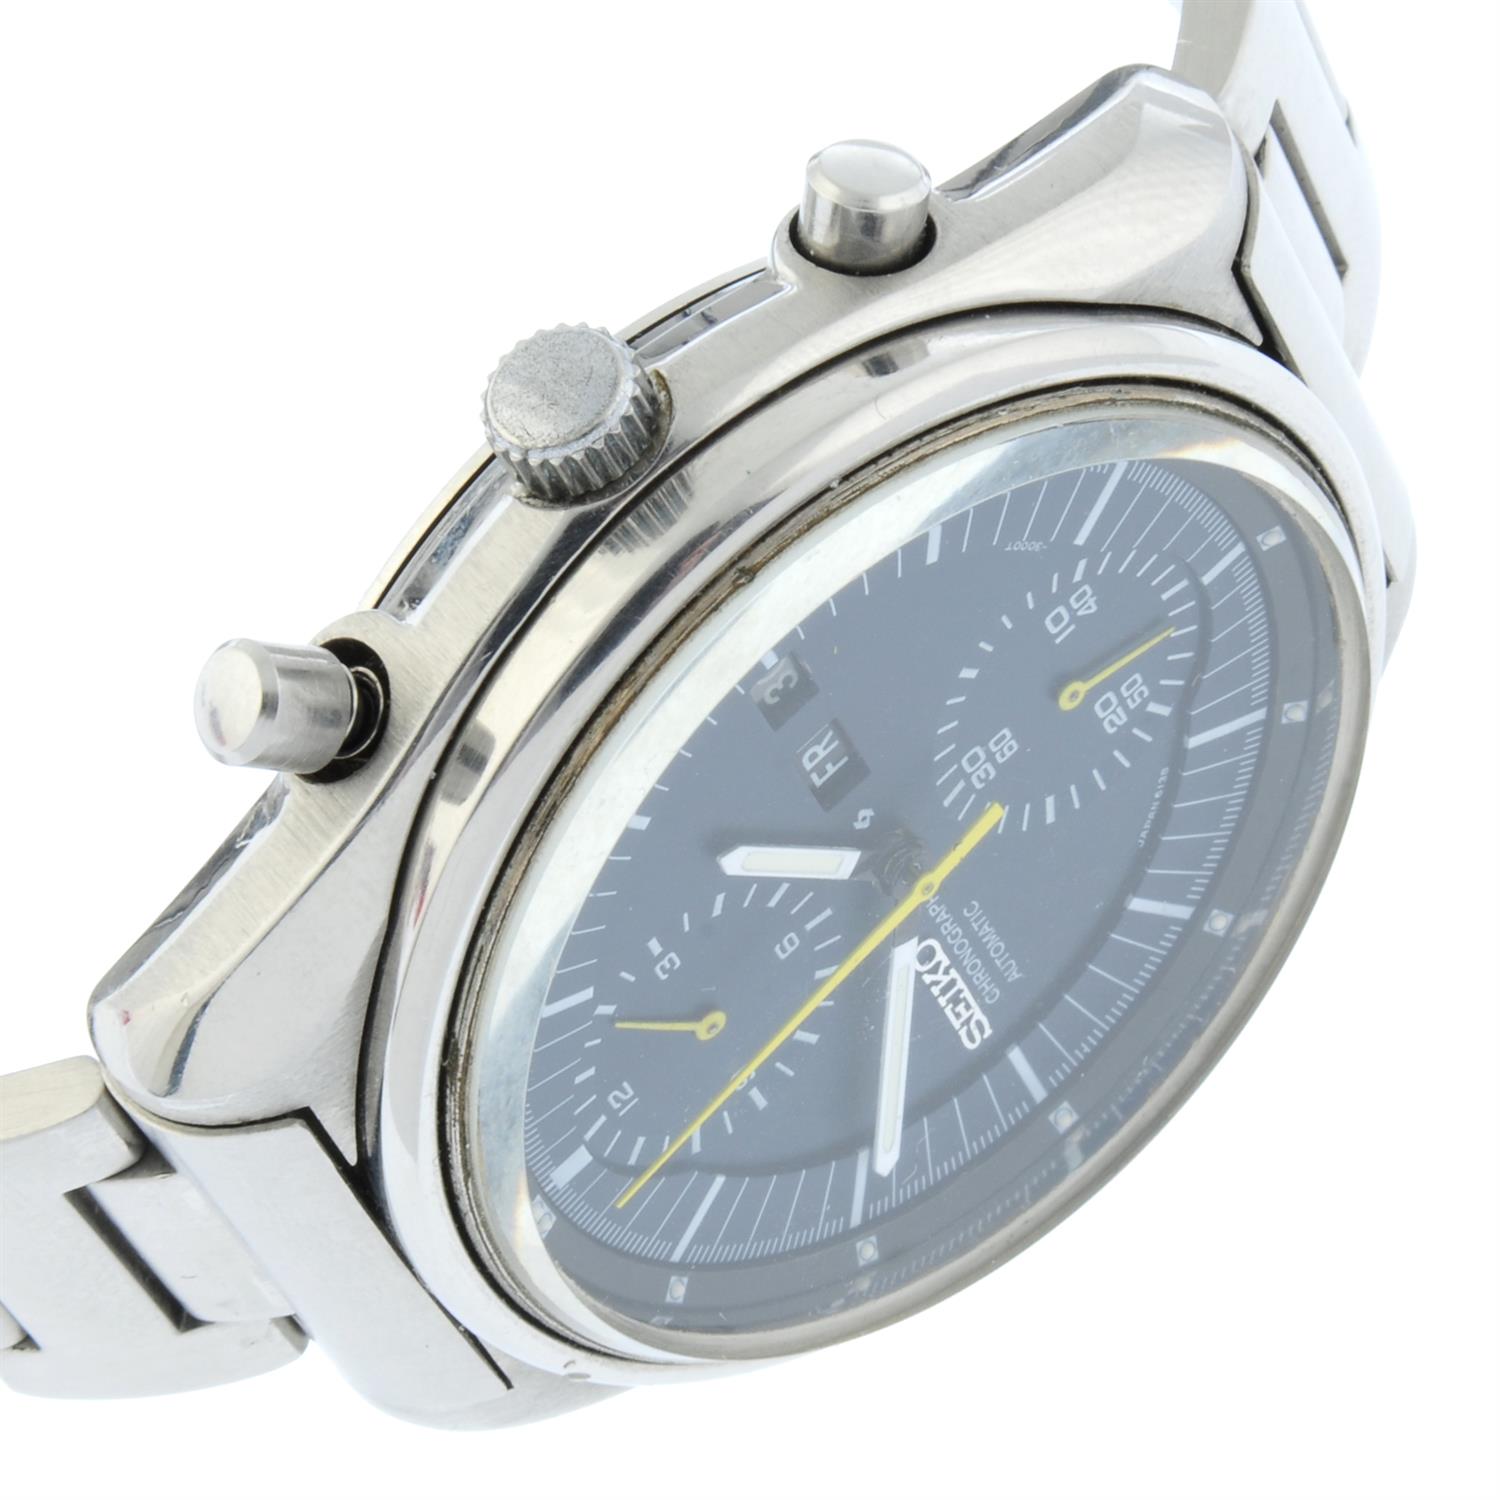 Seiko - a chronograph watch, 42mm. - Image 3 of 4